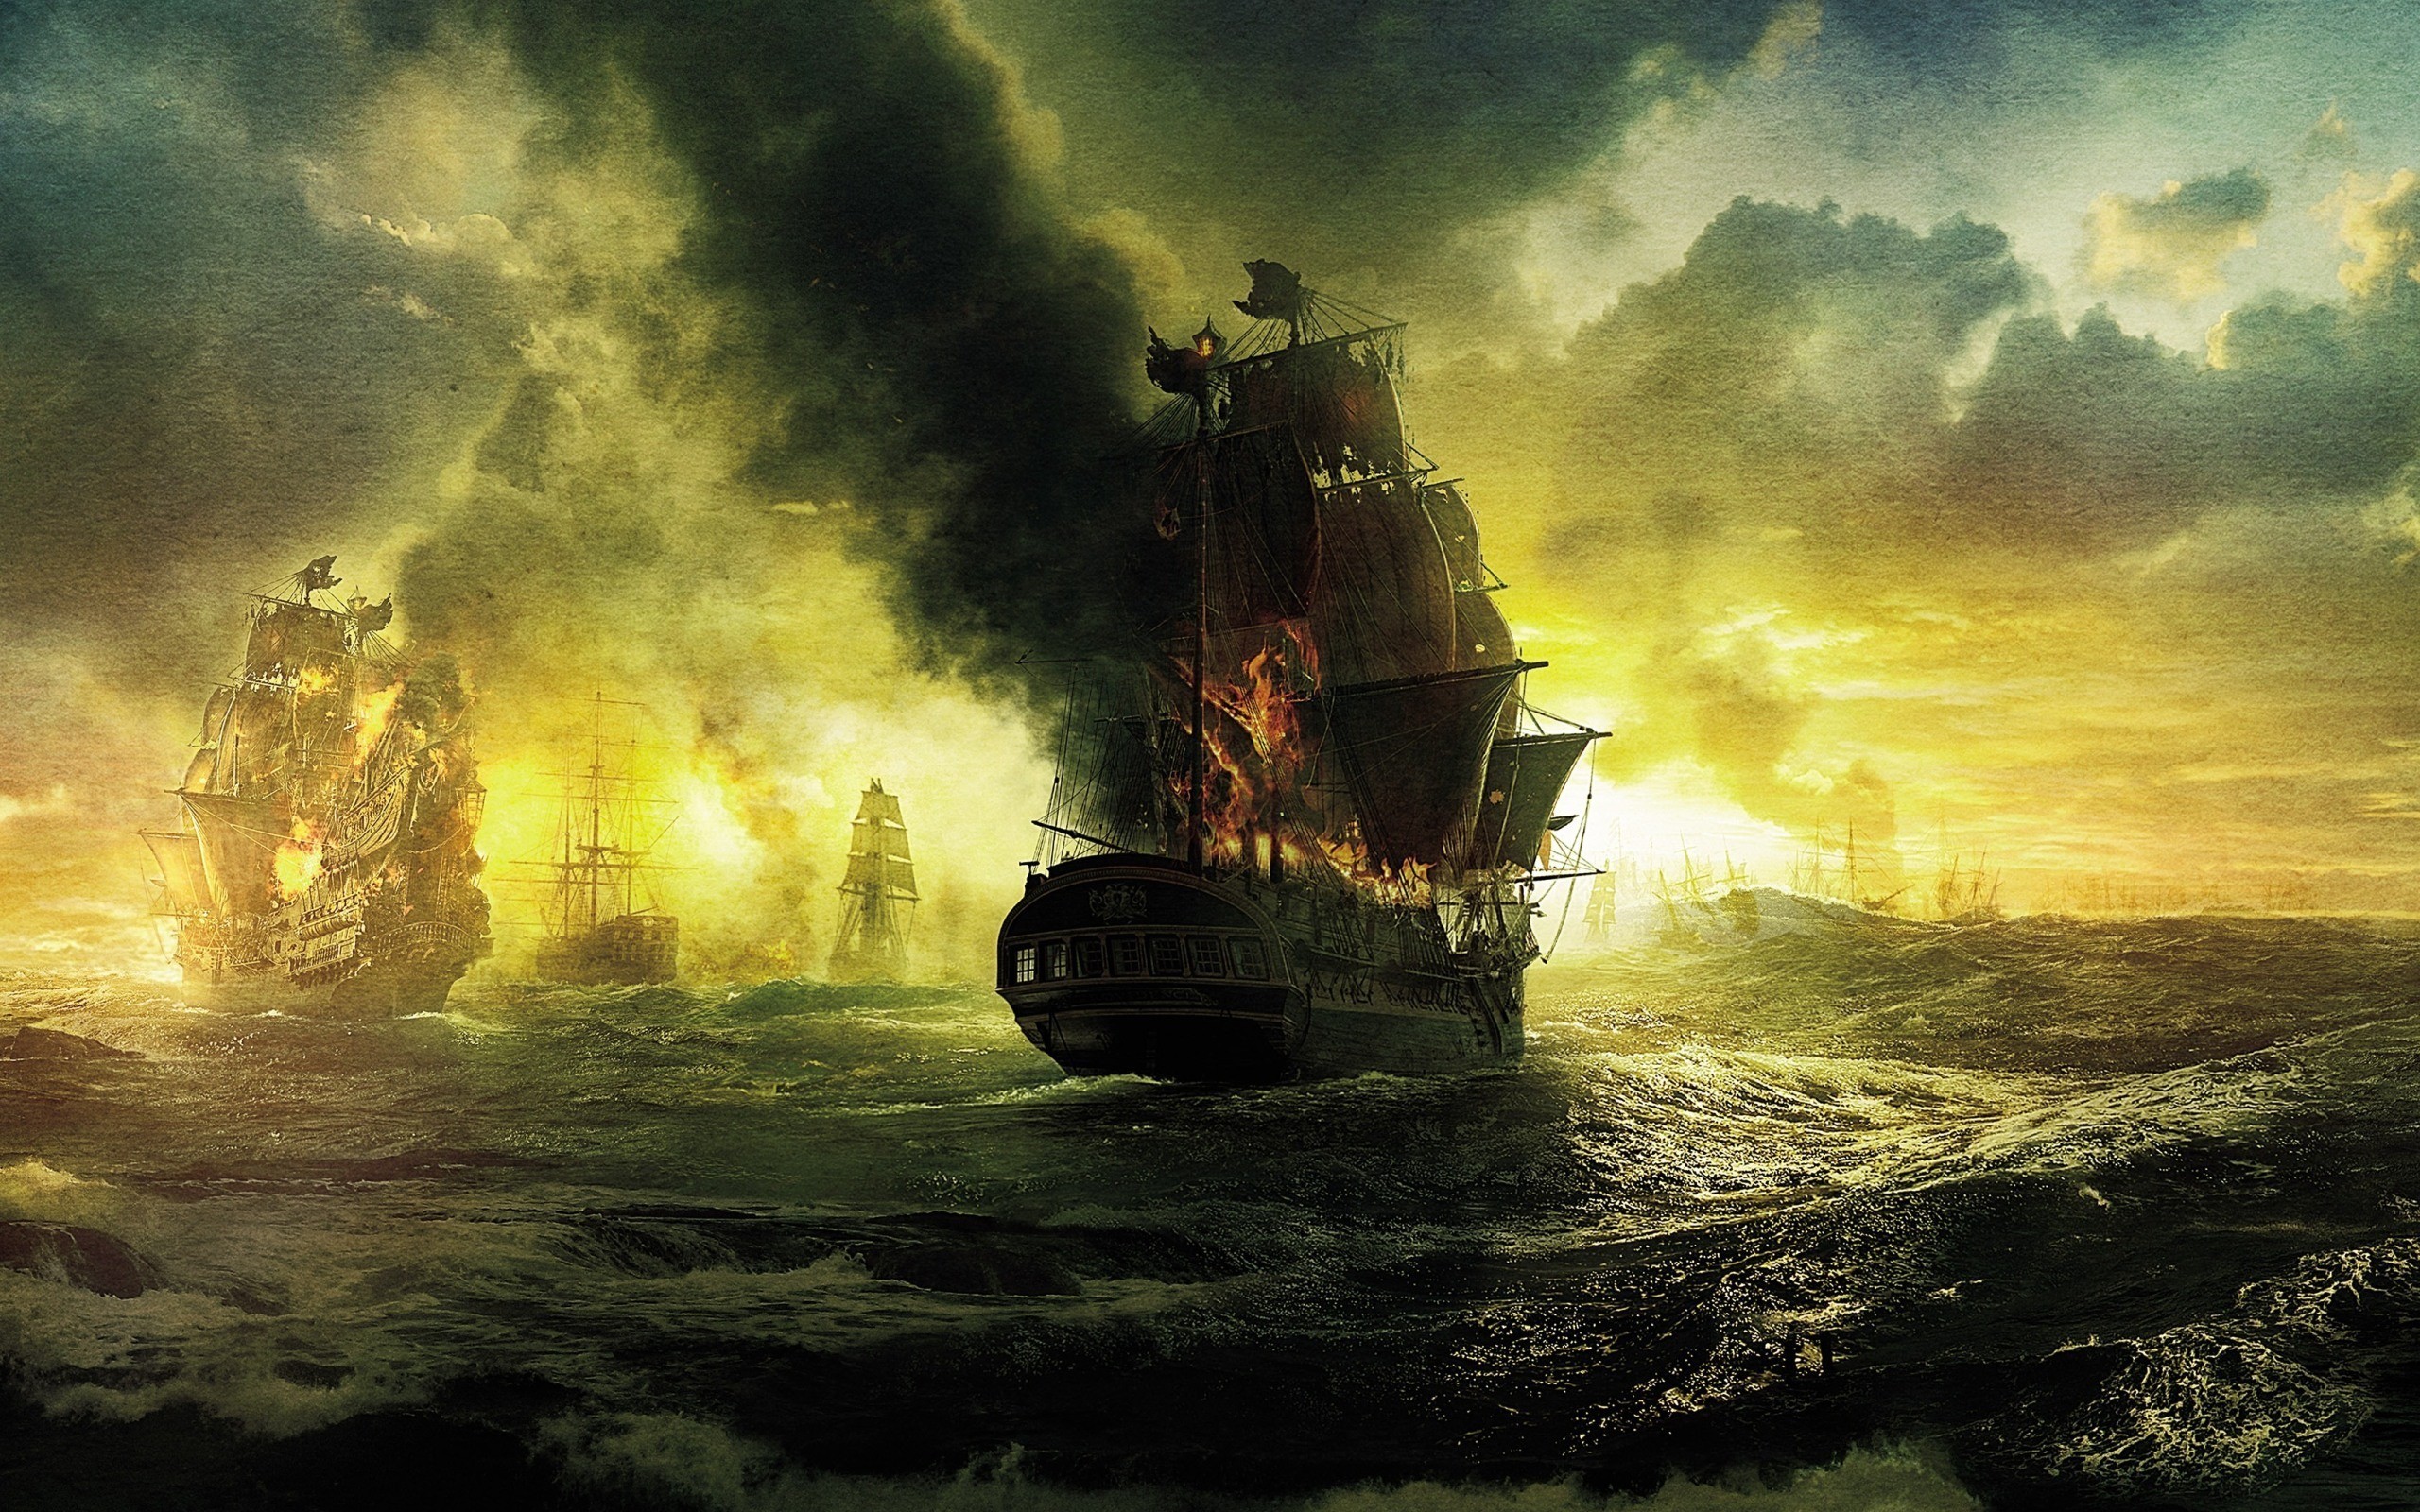 2560x1600 Movie - Pirates of the Caribbean: On Stranger Tides Pirate Wallpaper